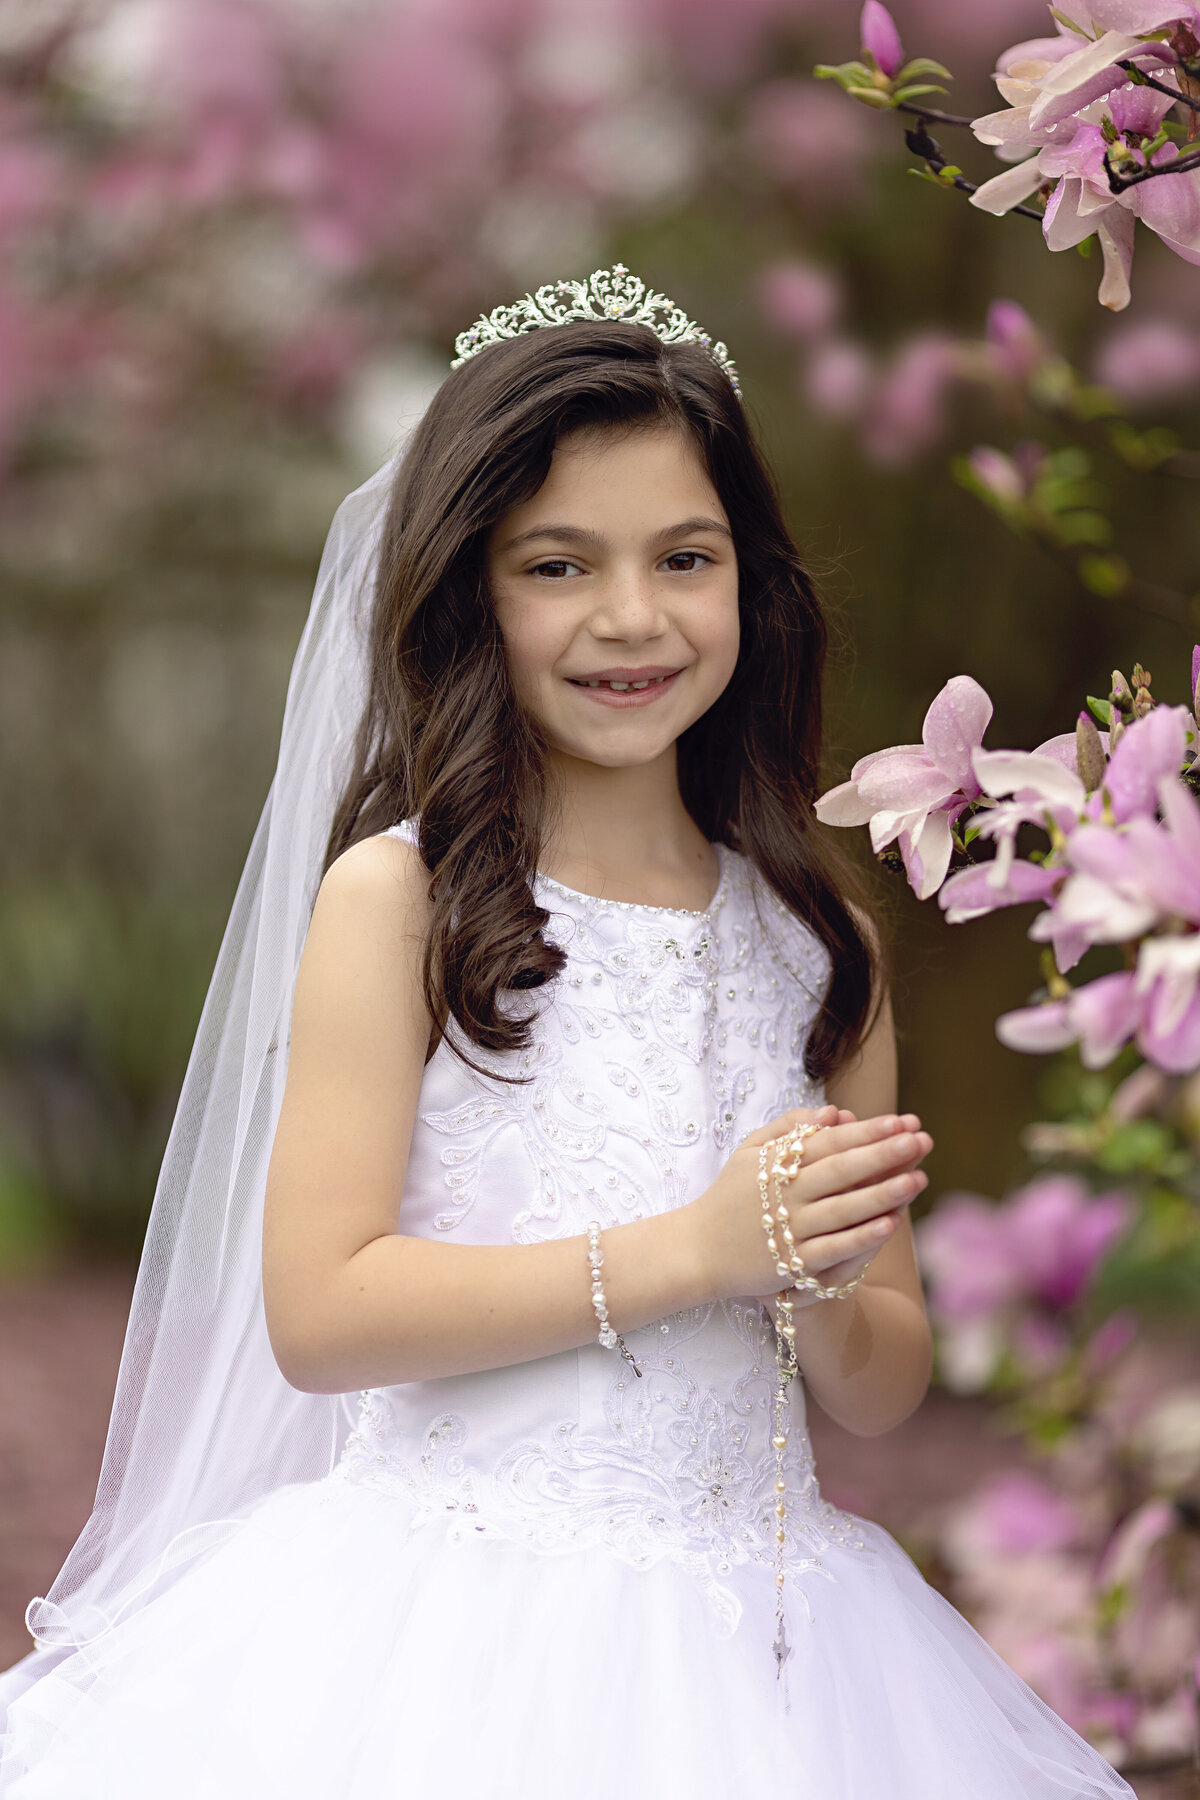 A young girl in a white lace dress prays with rosary beads with some pink flowers